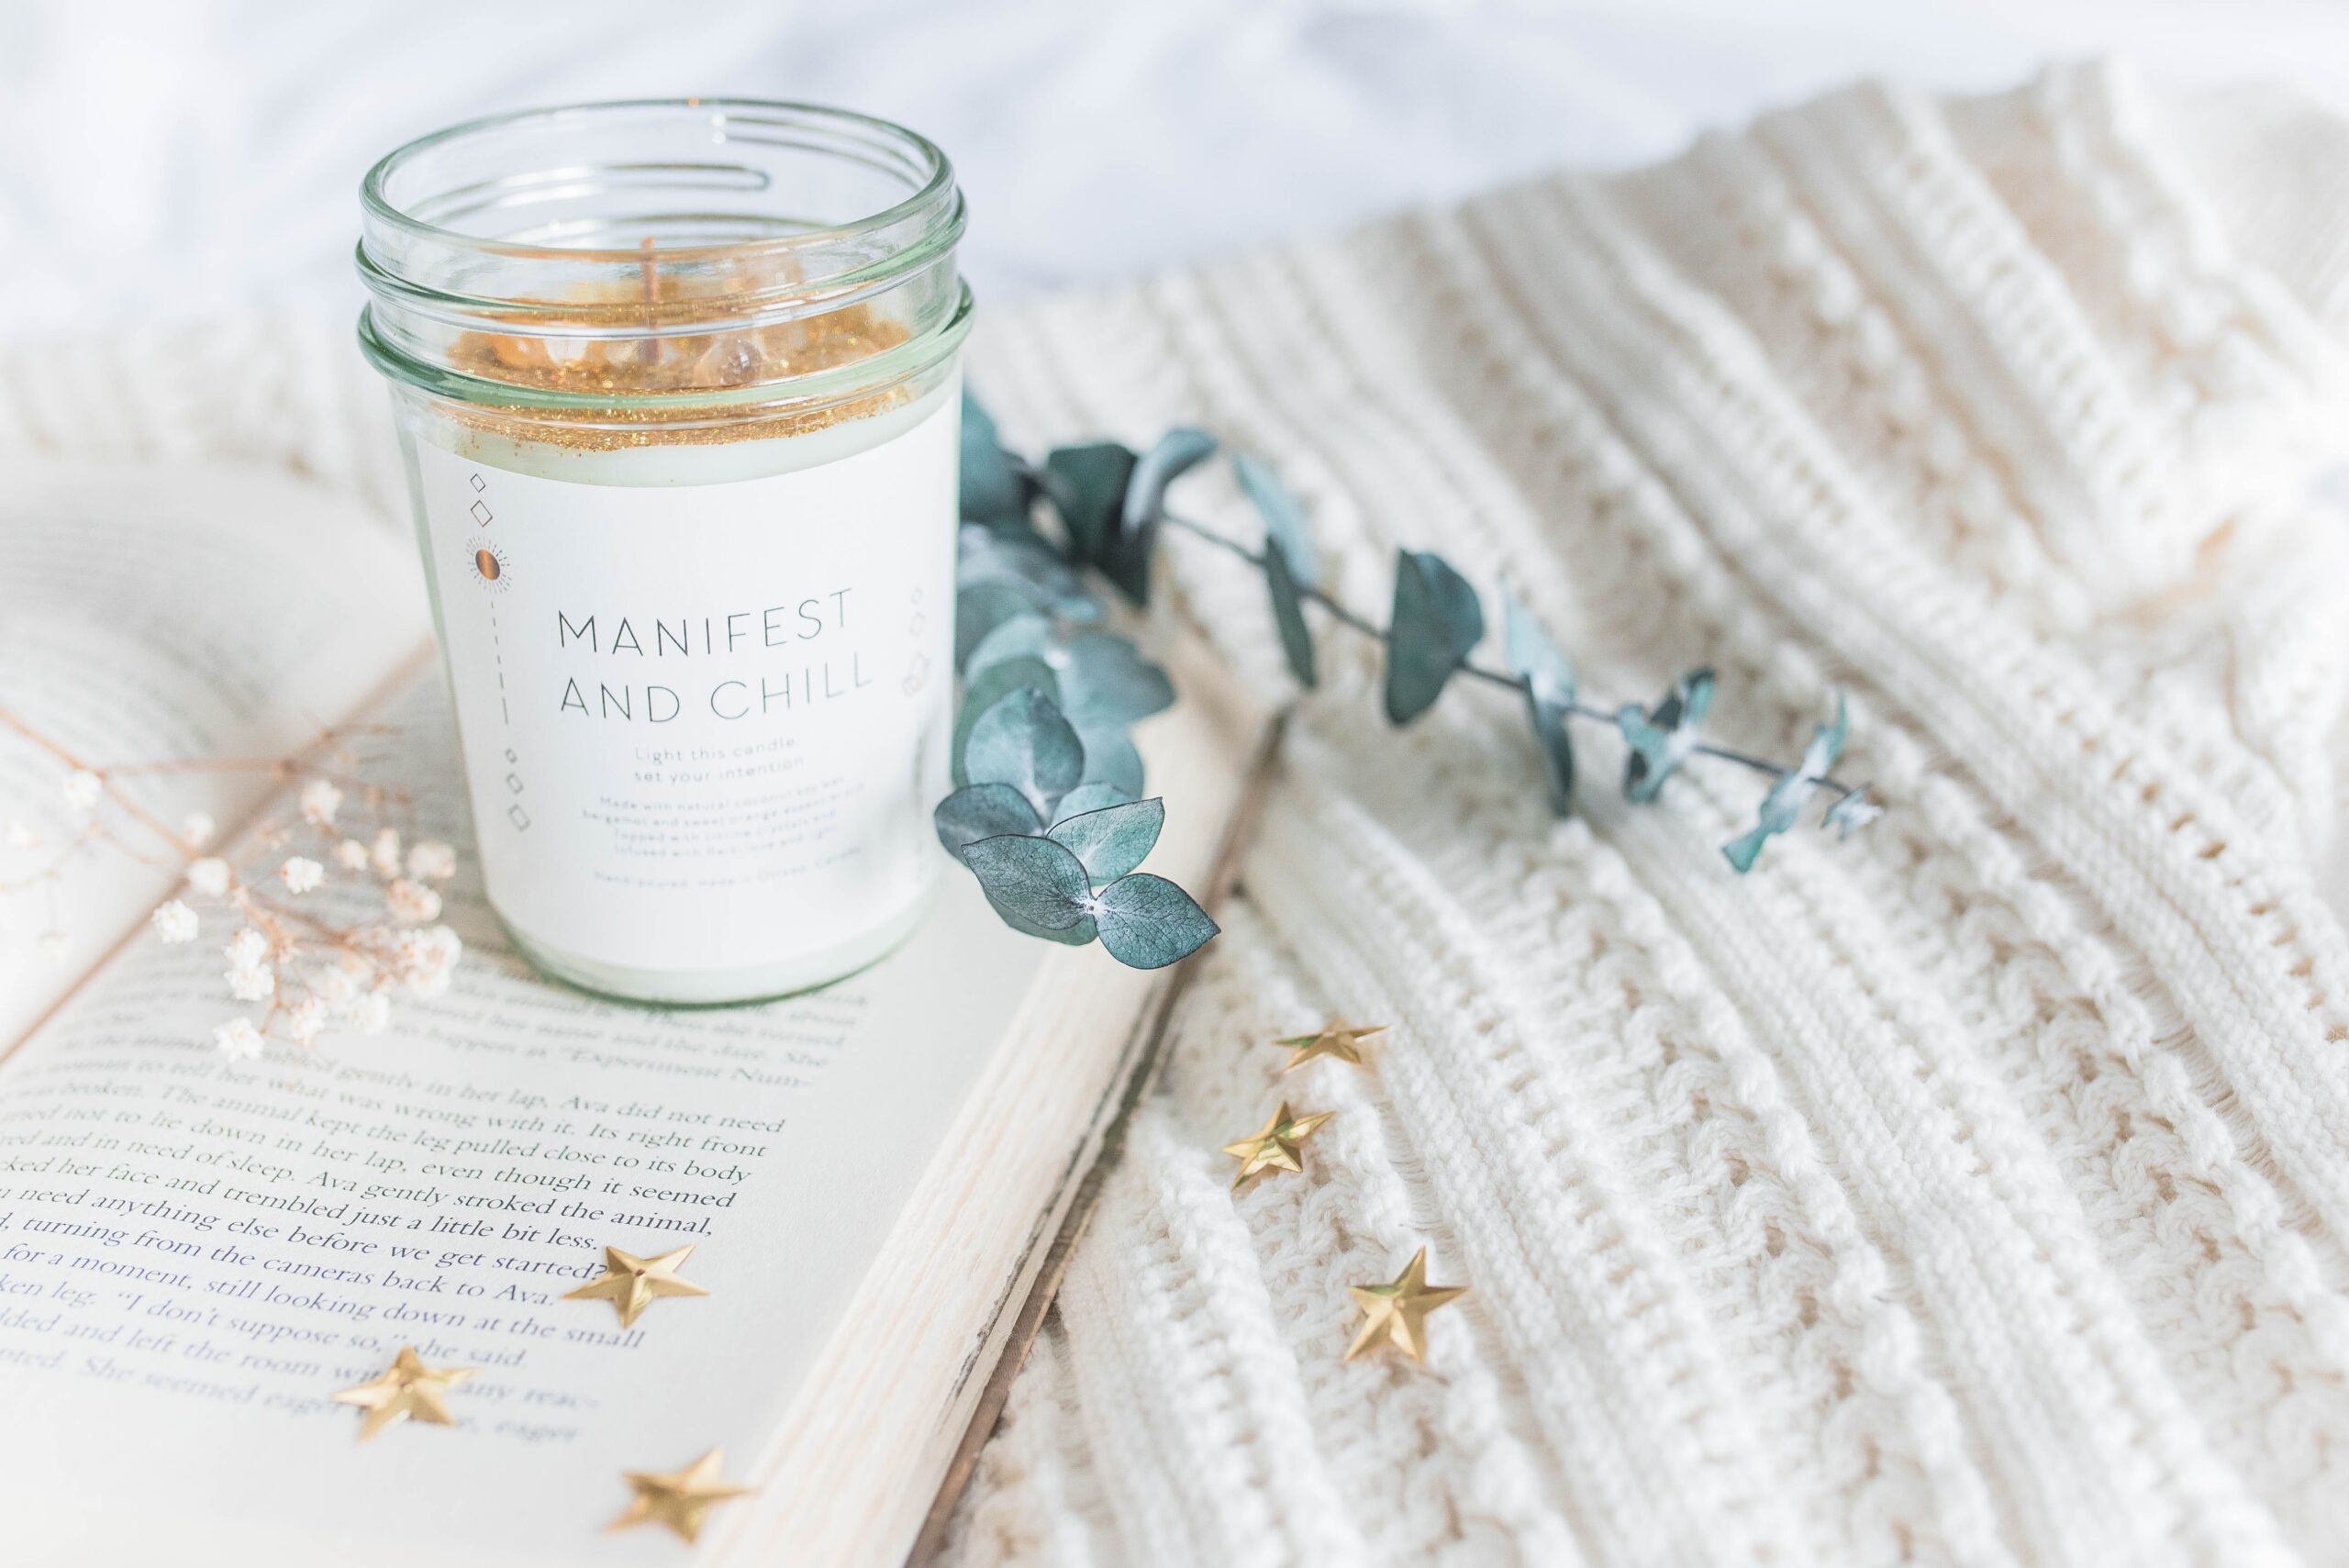 Include candles, wax melts, incense, room sprays or diffusers in your zen room for peaceful meditation sessions. Pictured: A candle